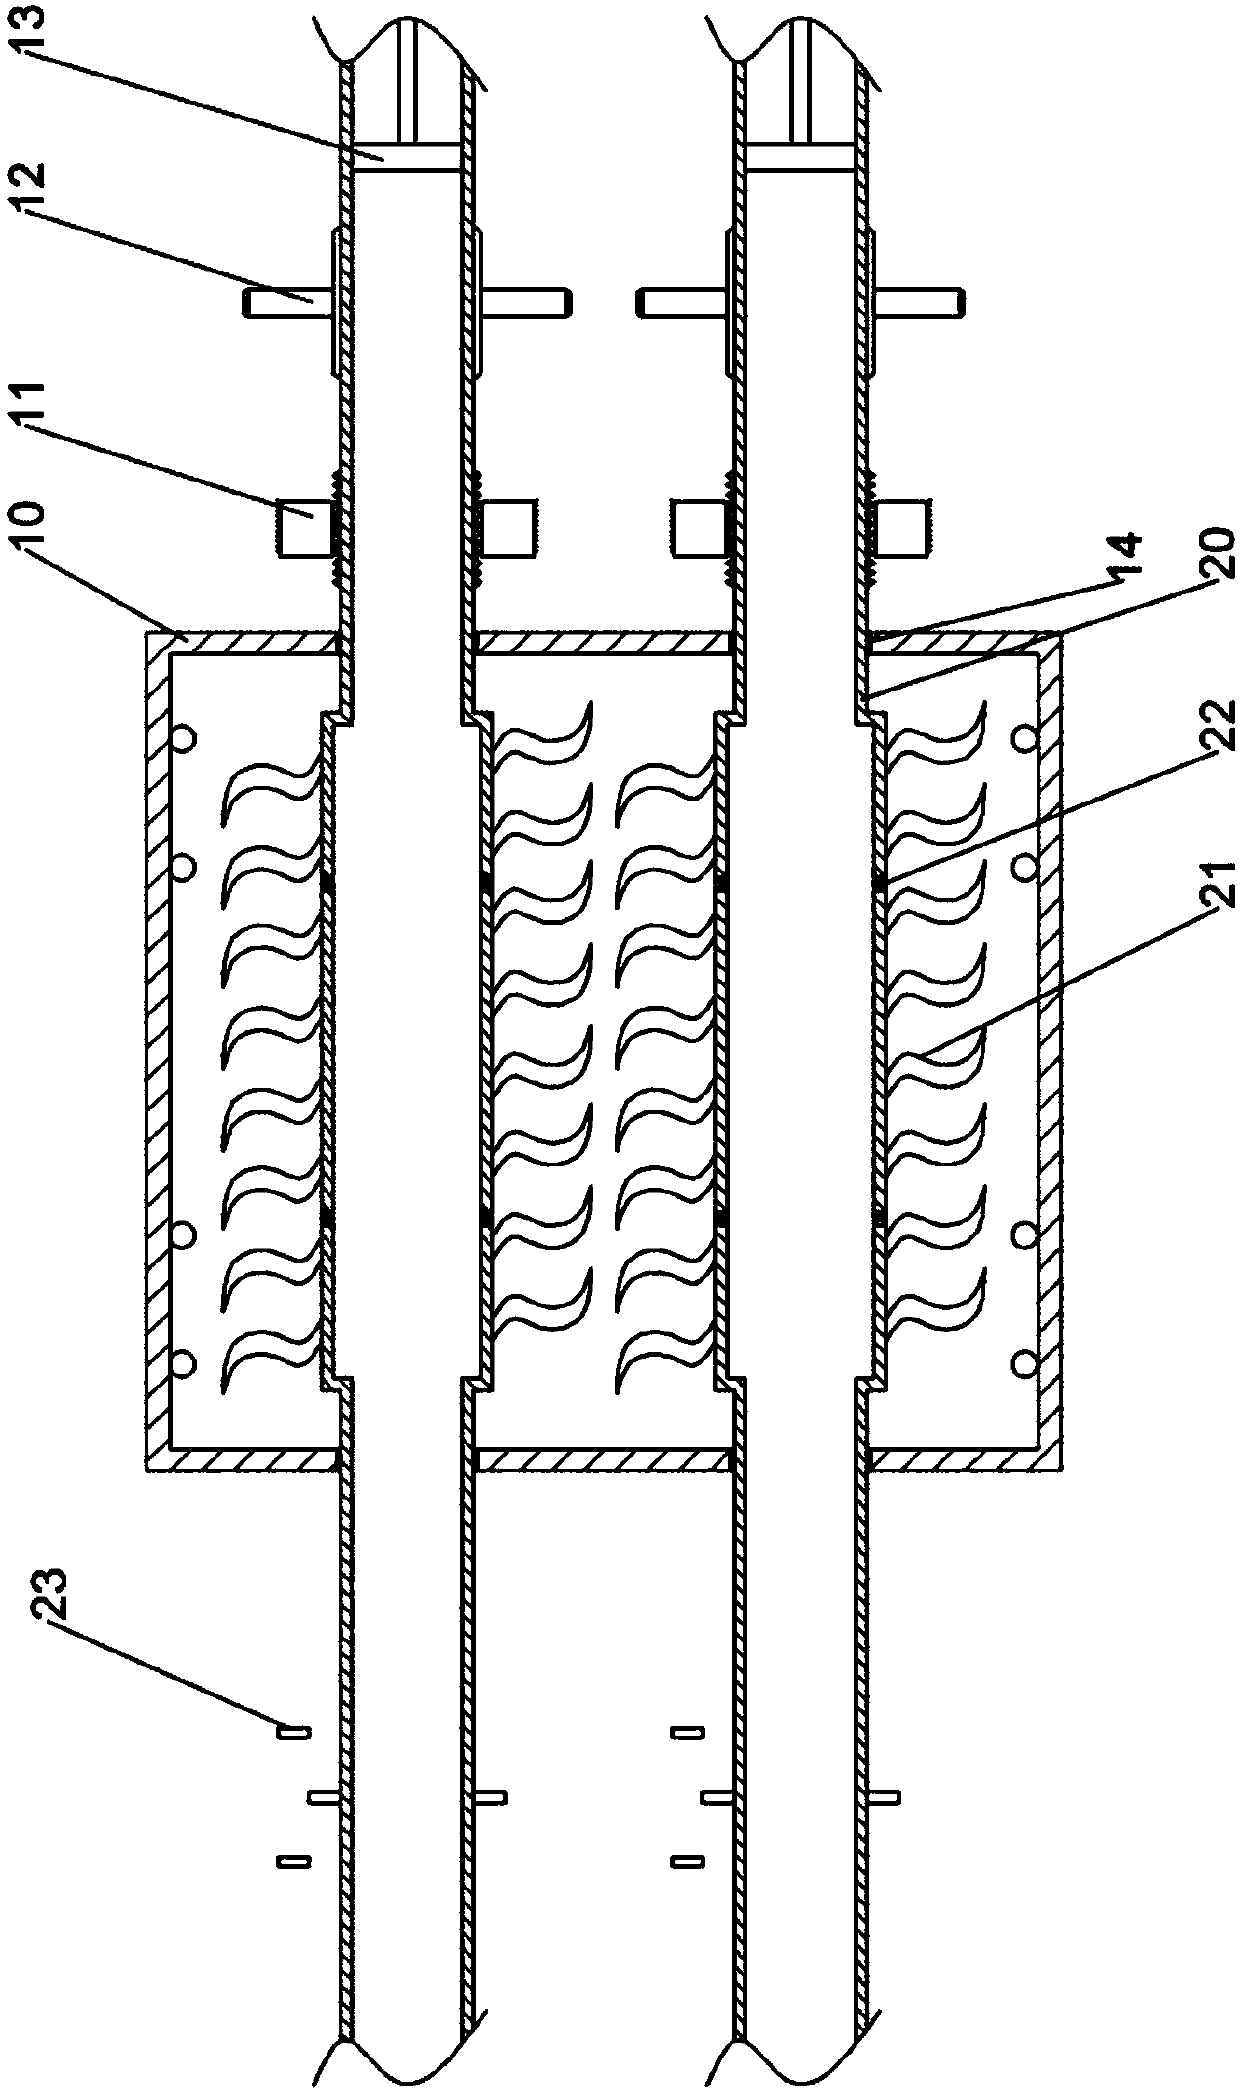 Chicken foot processing device